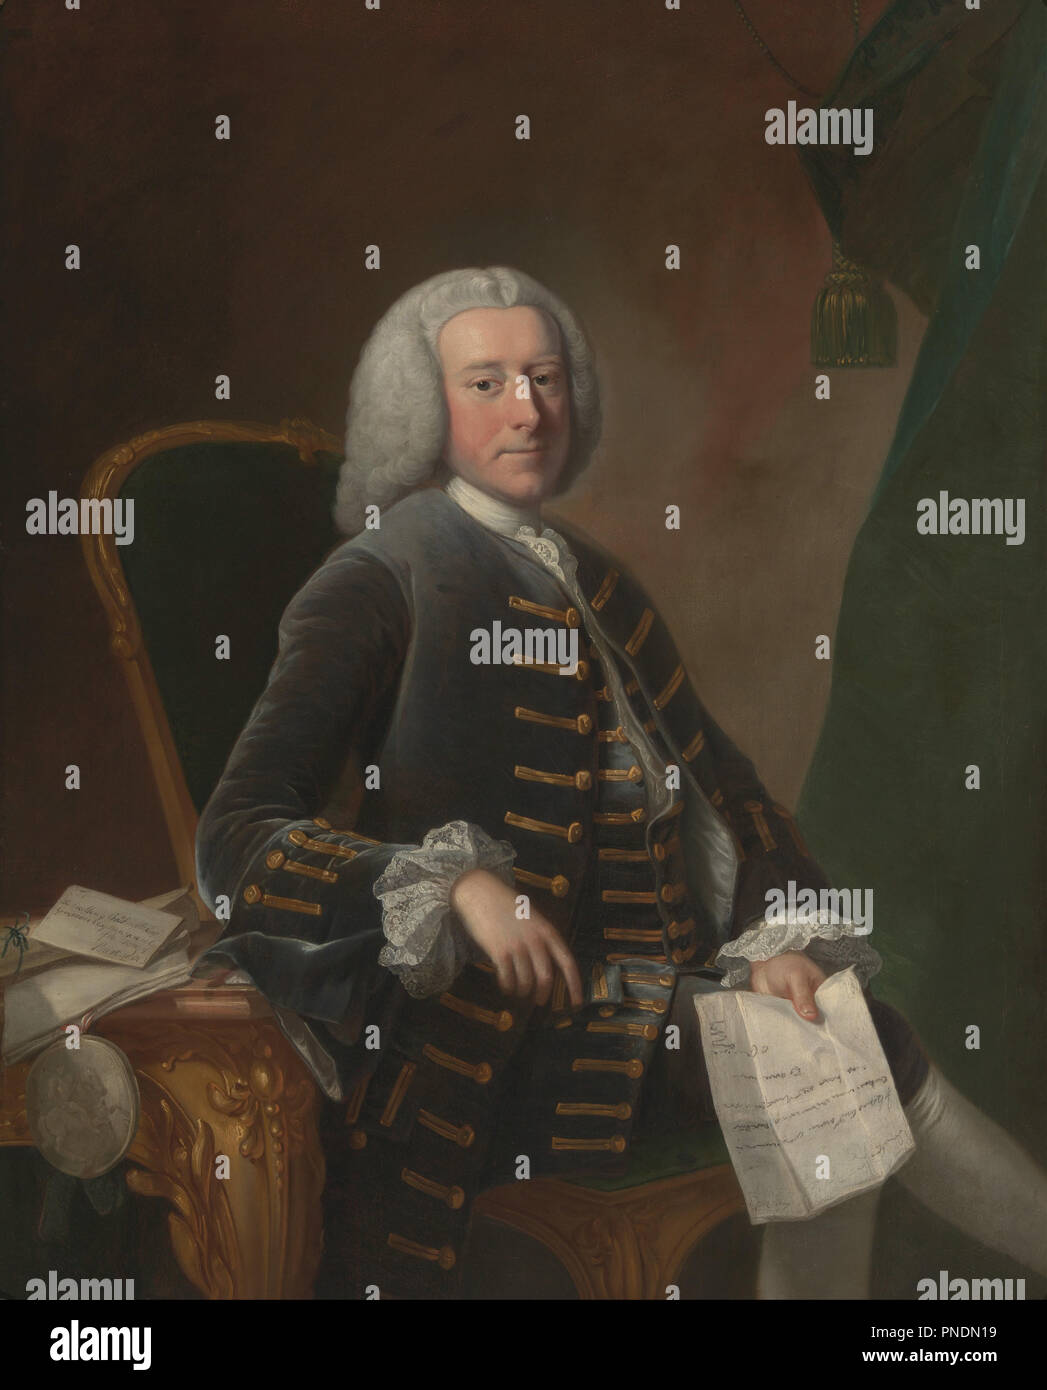 Charles Pinfold. Date/Period: 1756. Painting. Oil on canvas. Height: 1,270 mm (50 in); Width: 1,016 mm (40 in). Author: HUDSON, THOMAS. Stock Photo